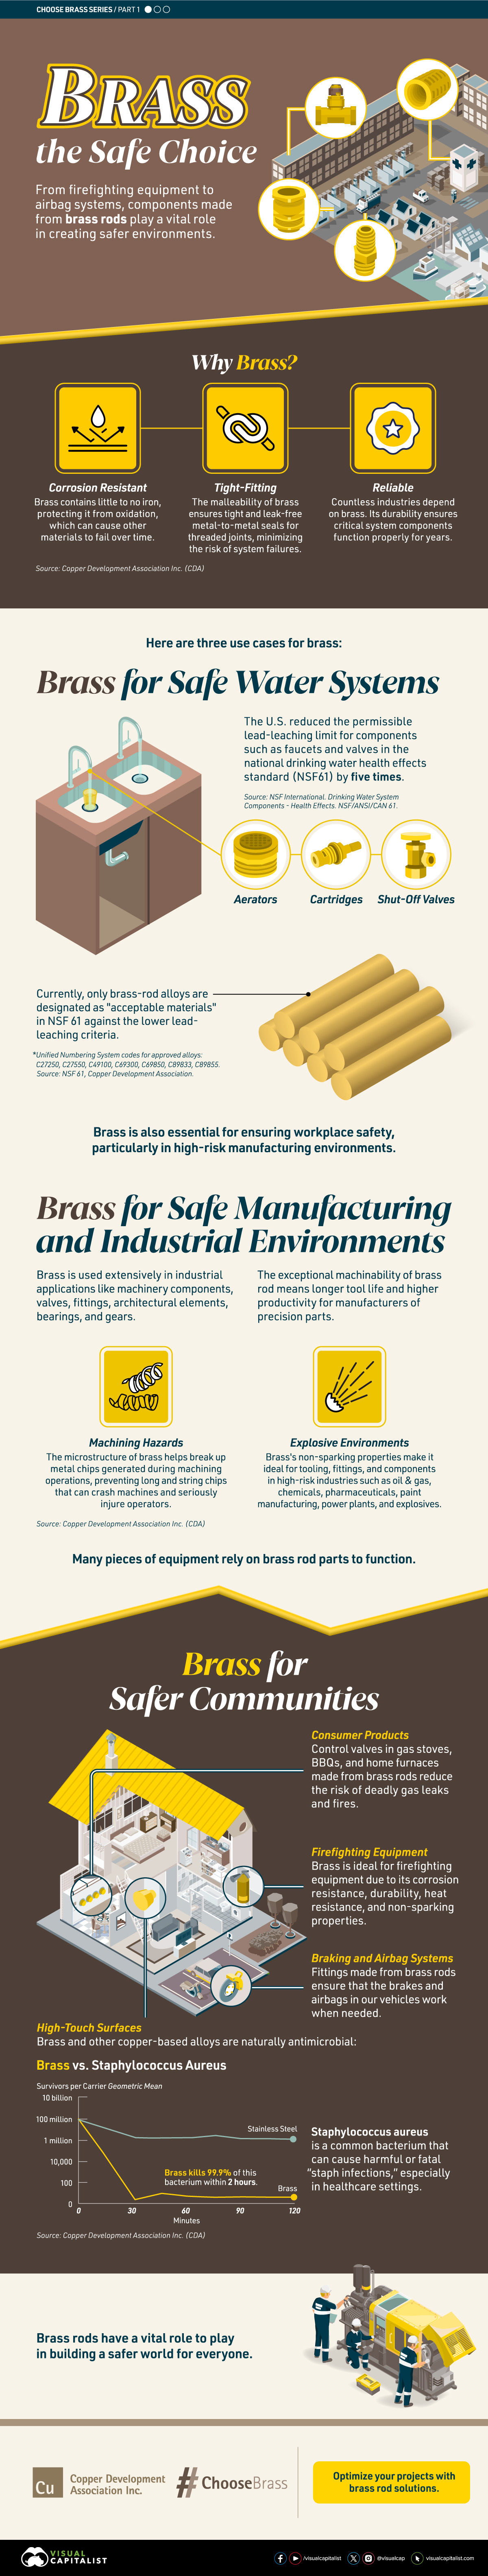 Infographic illustrating how the use of brass rods in water systems and industrial settings can create safer environments.